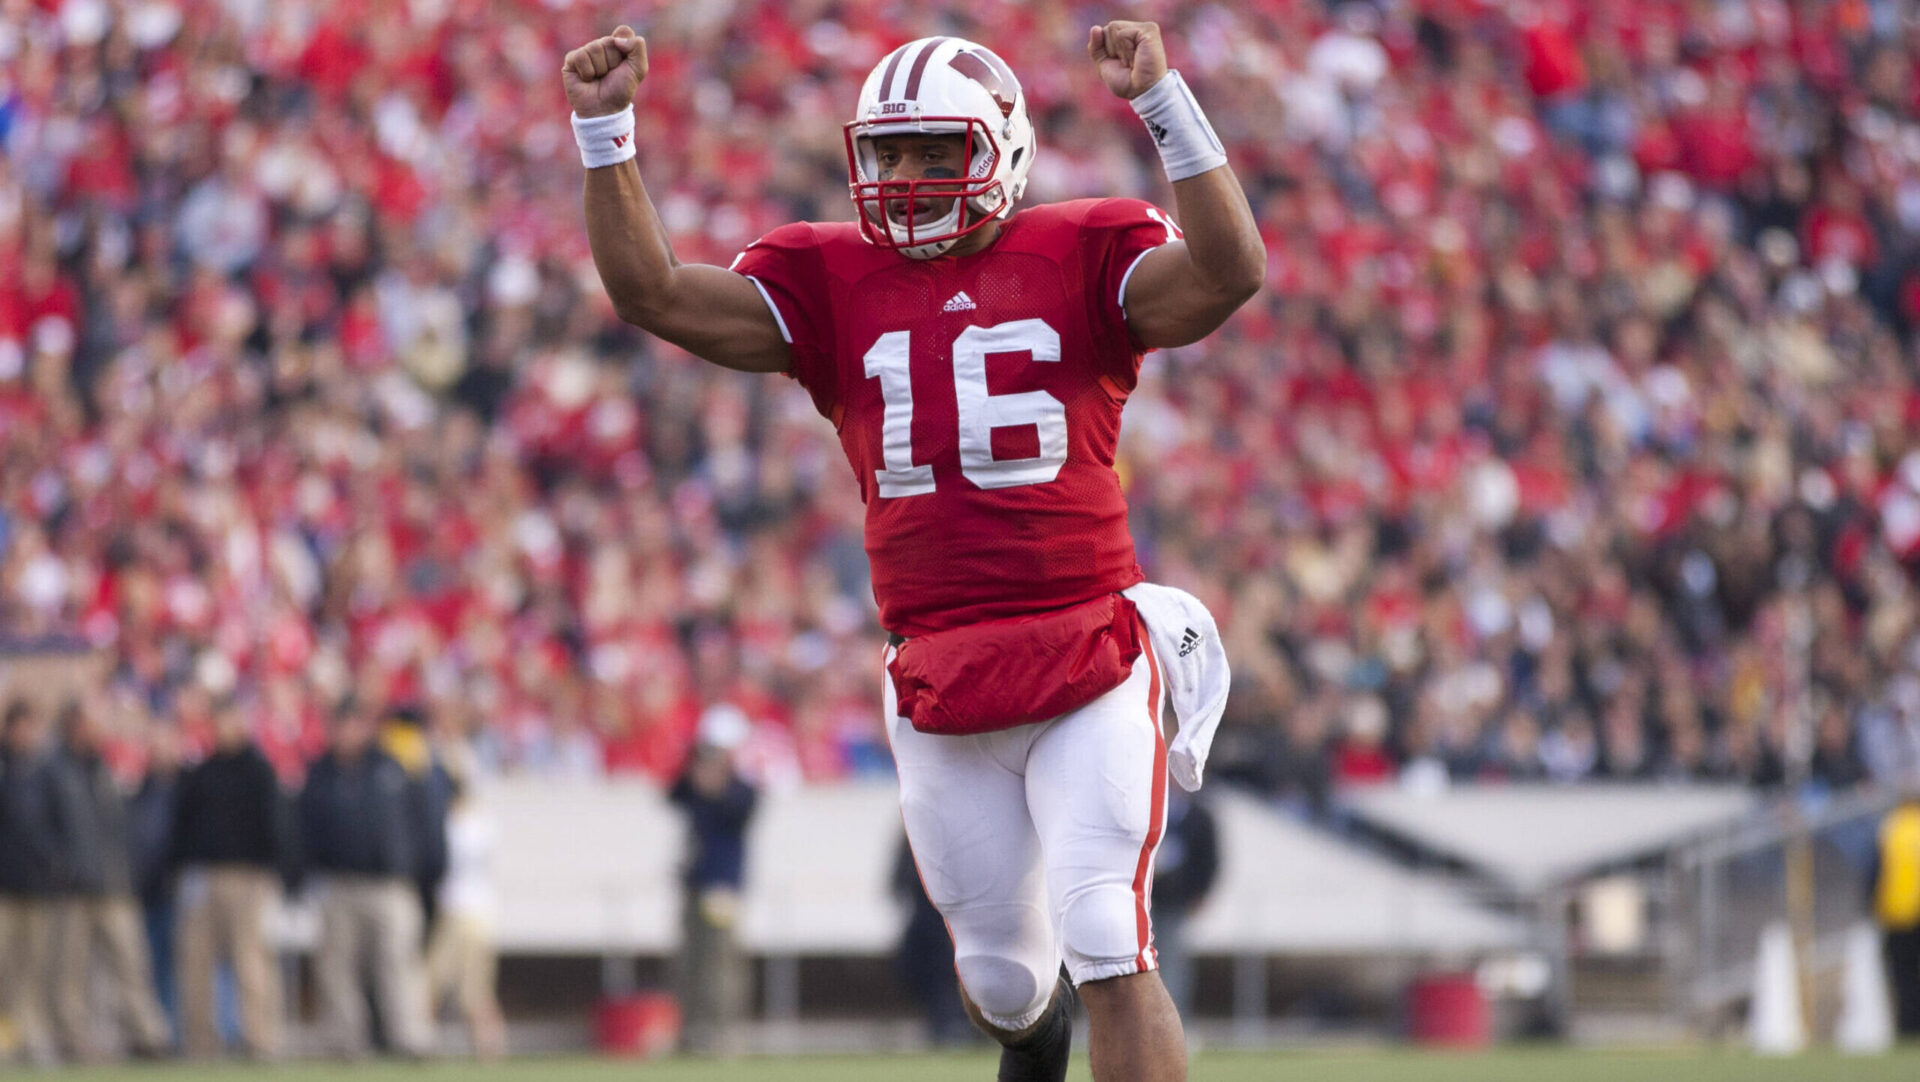 Former Wisconsin Badgers quarterback signs with the Steelers